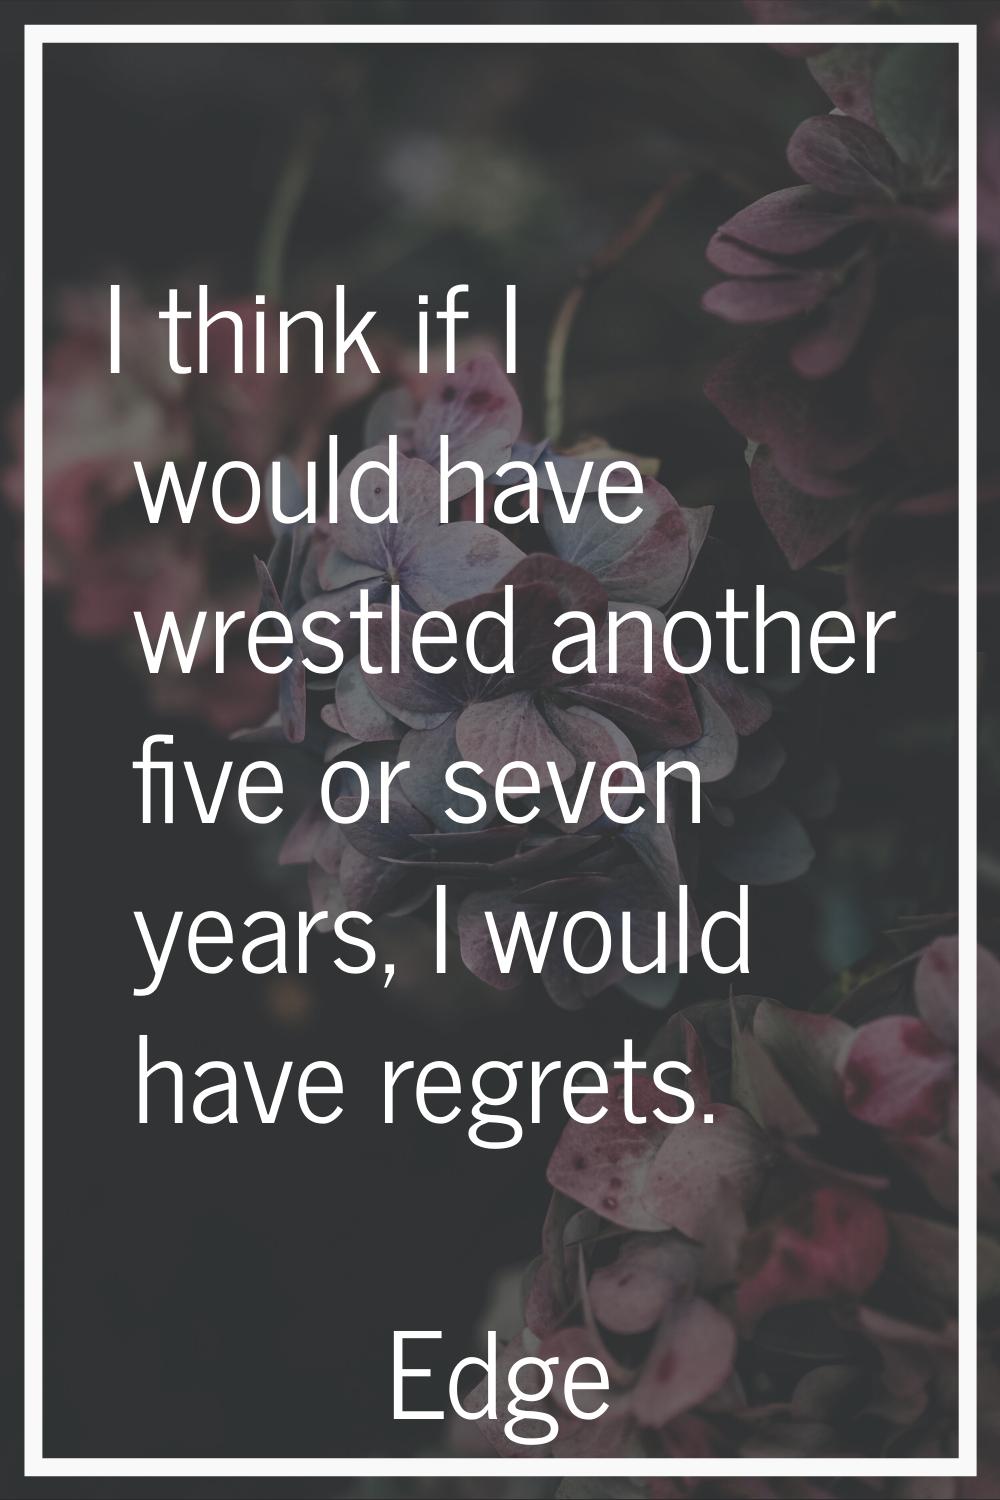 I think if I would have wrestled another five or seven years, I would have regrets.